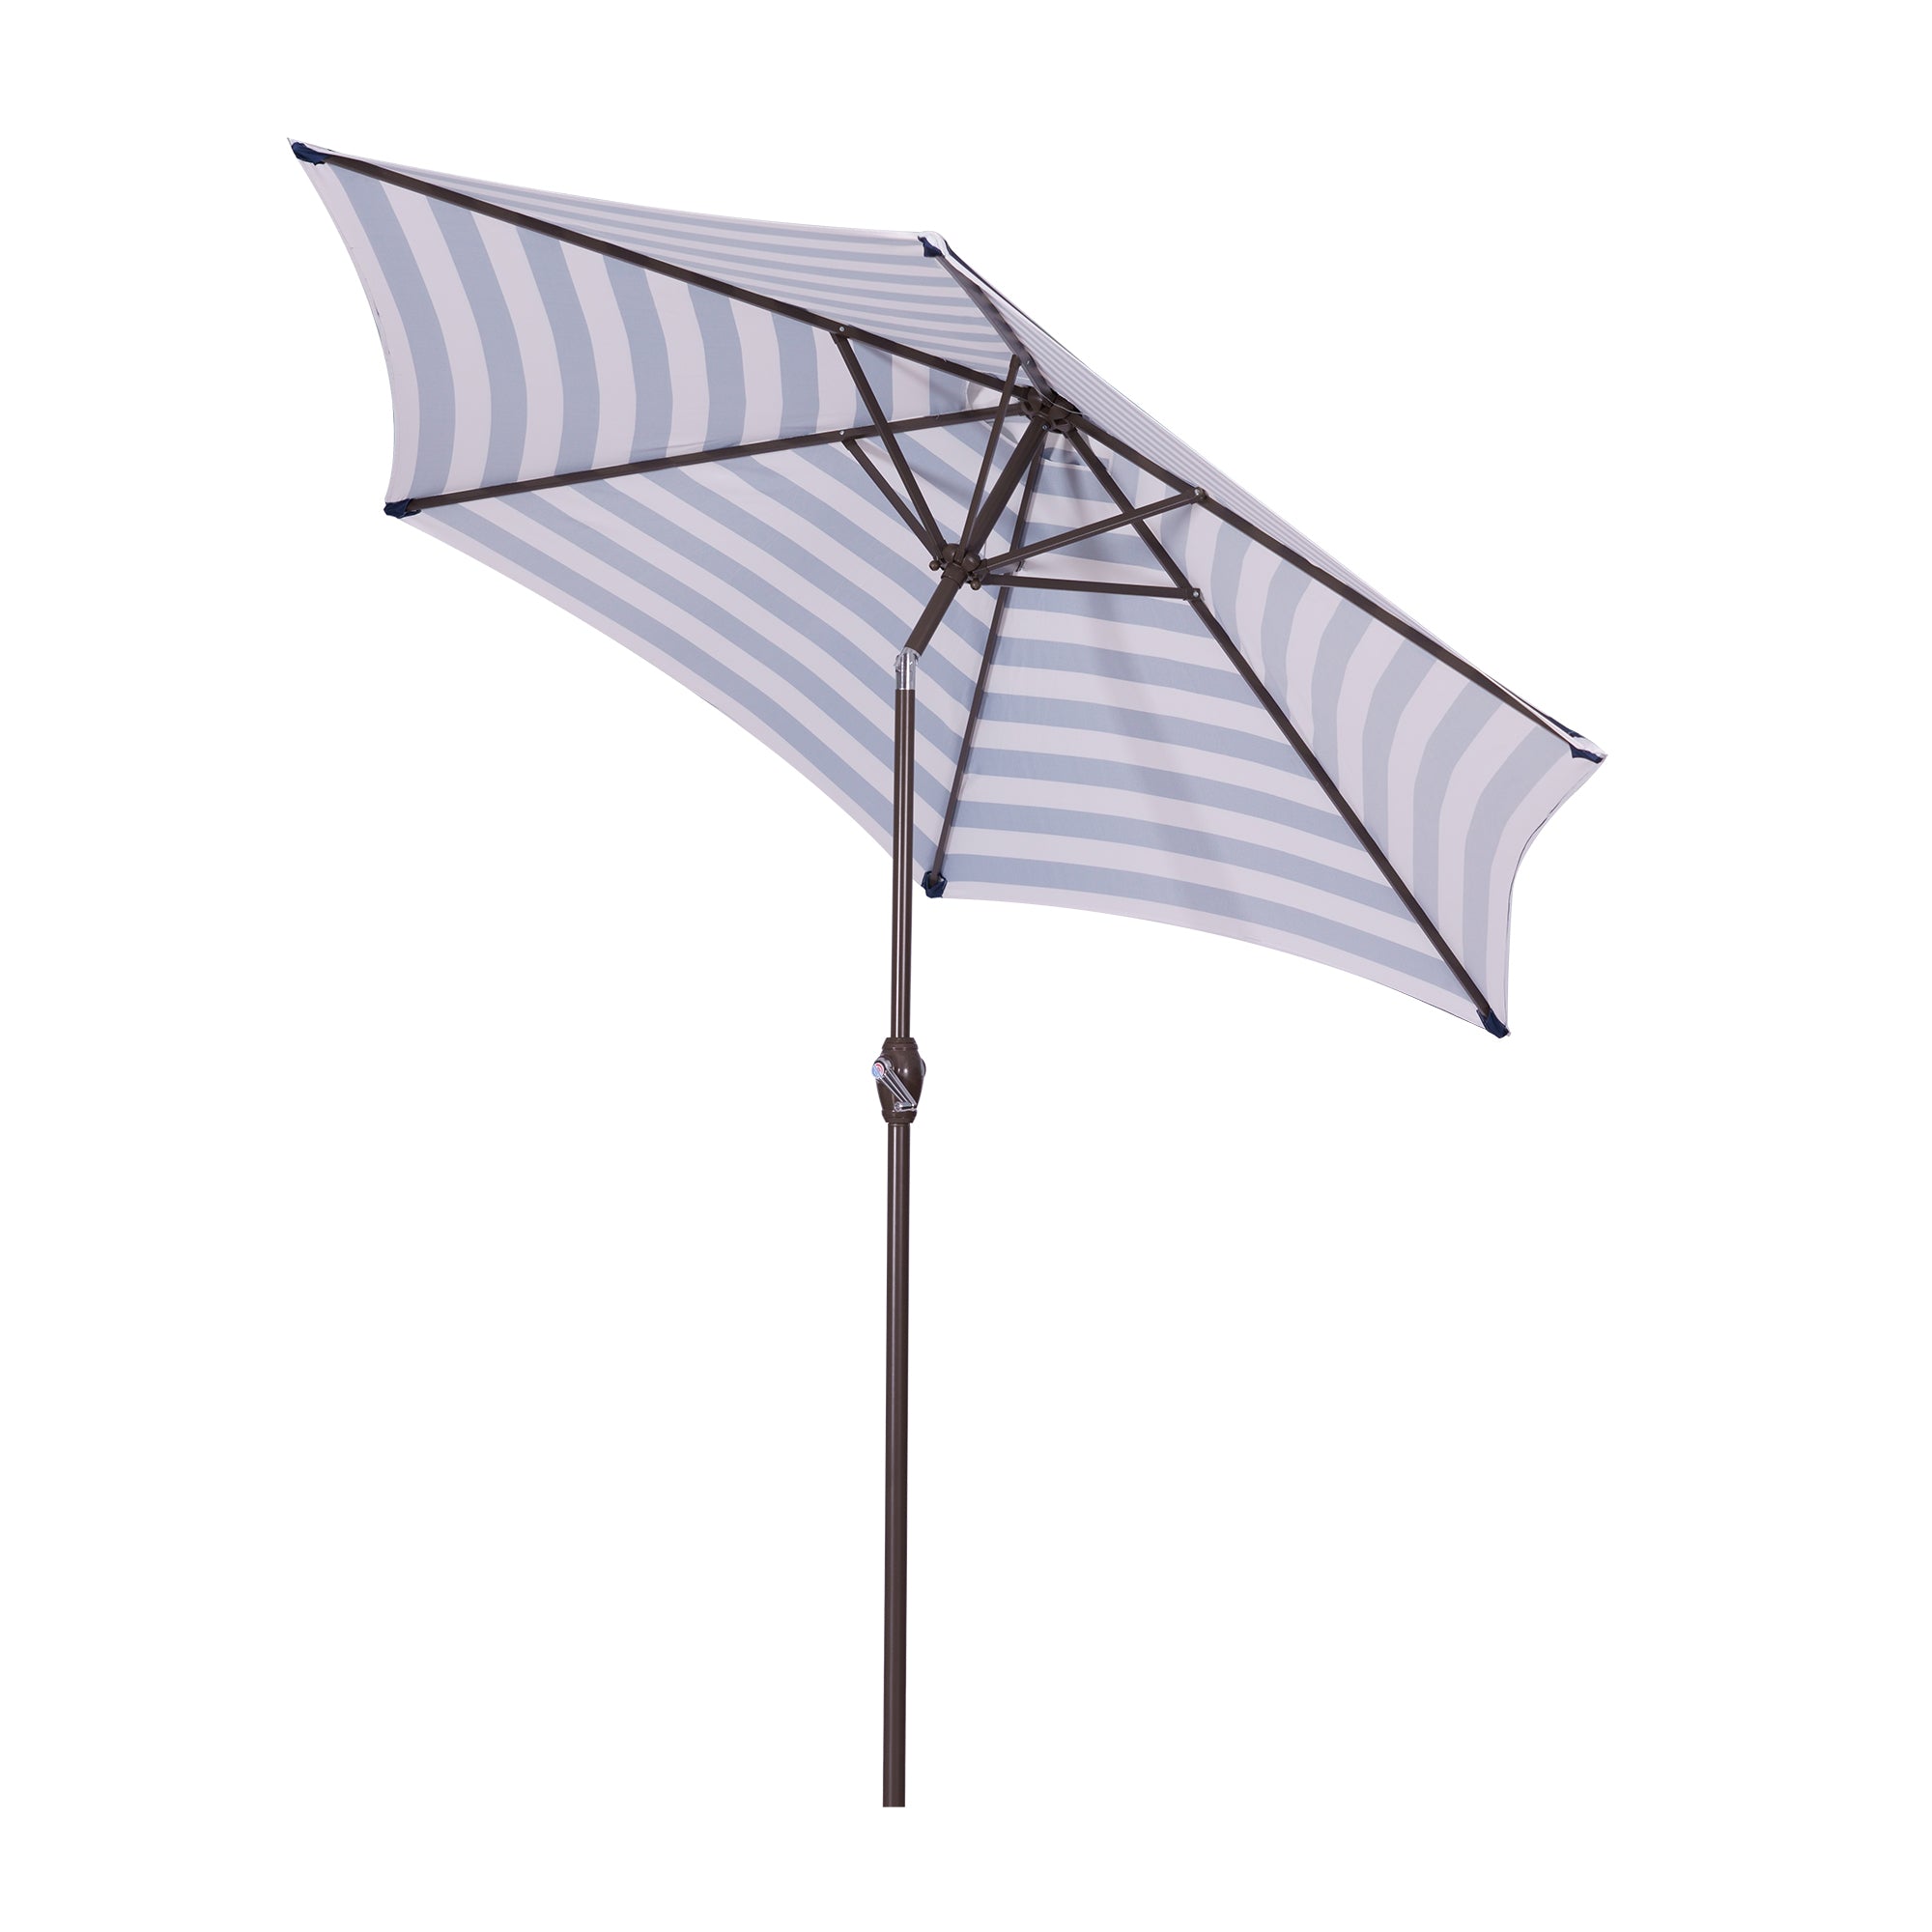 CoSoTower Outdoor Patio 8.6-Feet Market Table Umbrella With Push Button Tilt And Crank, Blue/White Stripes[Umbrella Base is not Included]